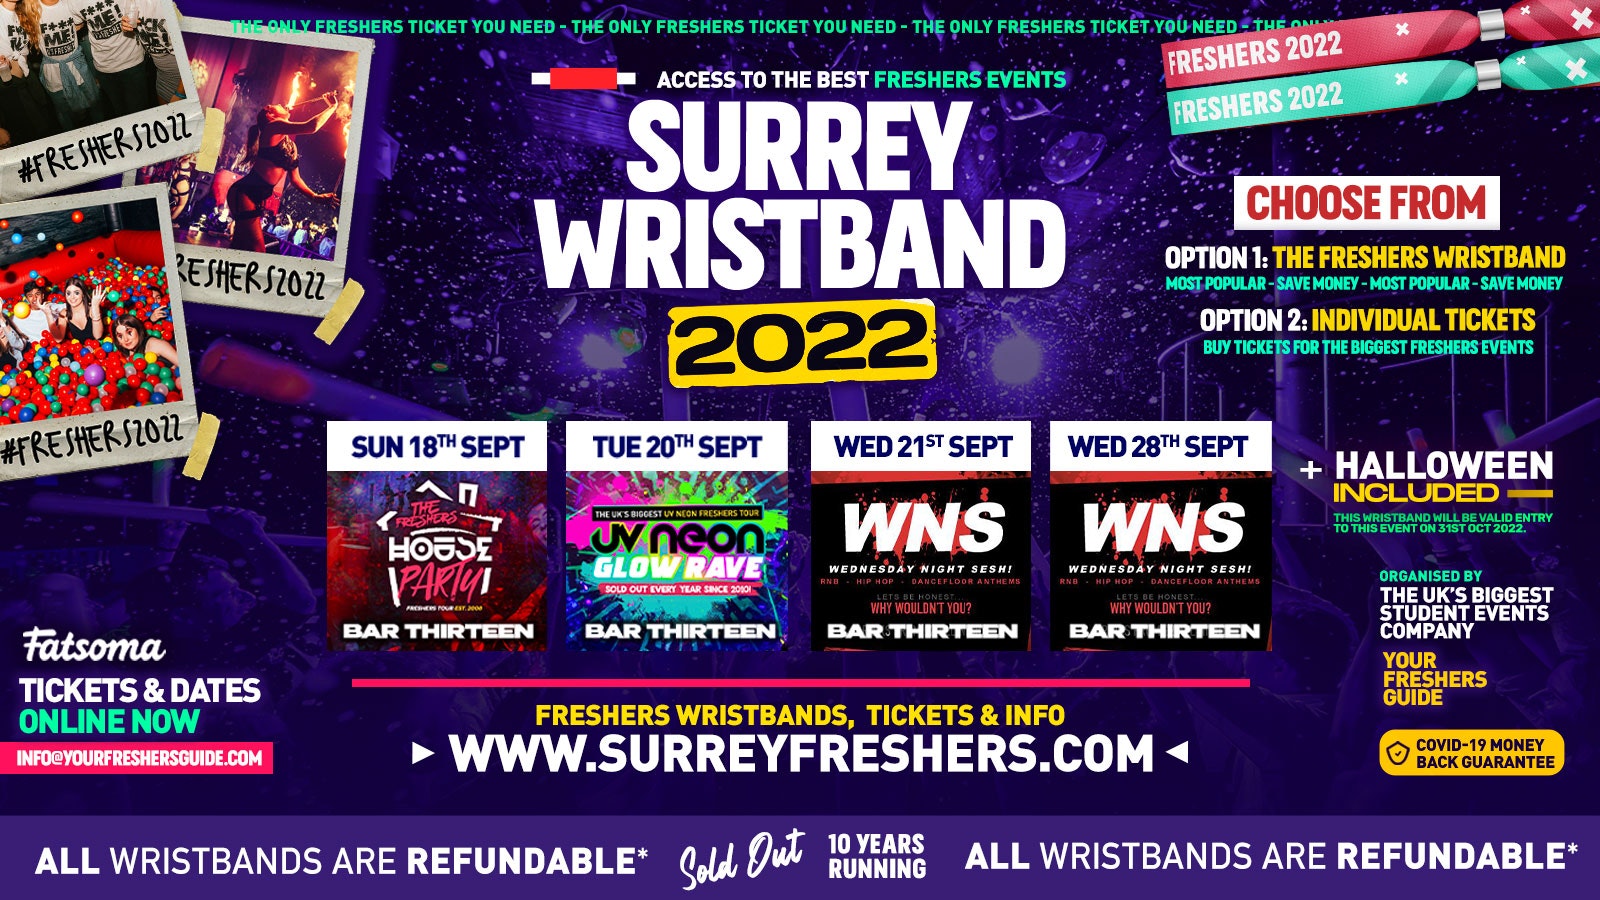 Surrey Freshers Wristband 2022 – The BIGGEST Events in Surrey’s BEST Clubs / Surrey Freshers 2022